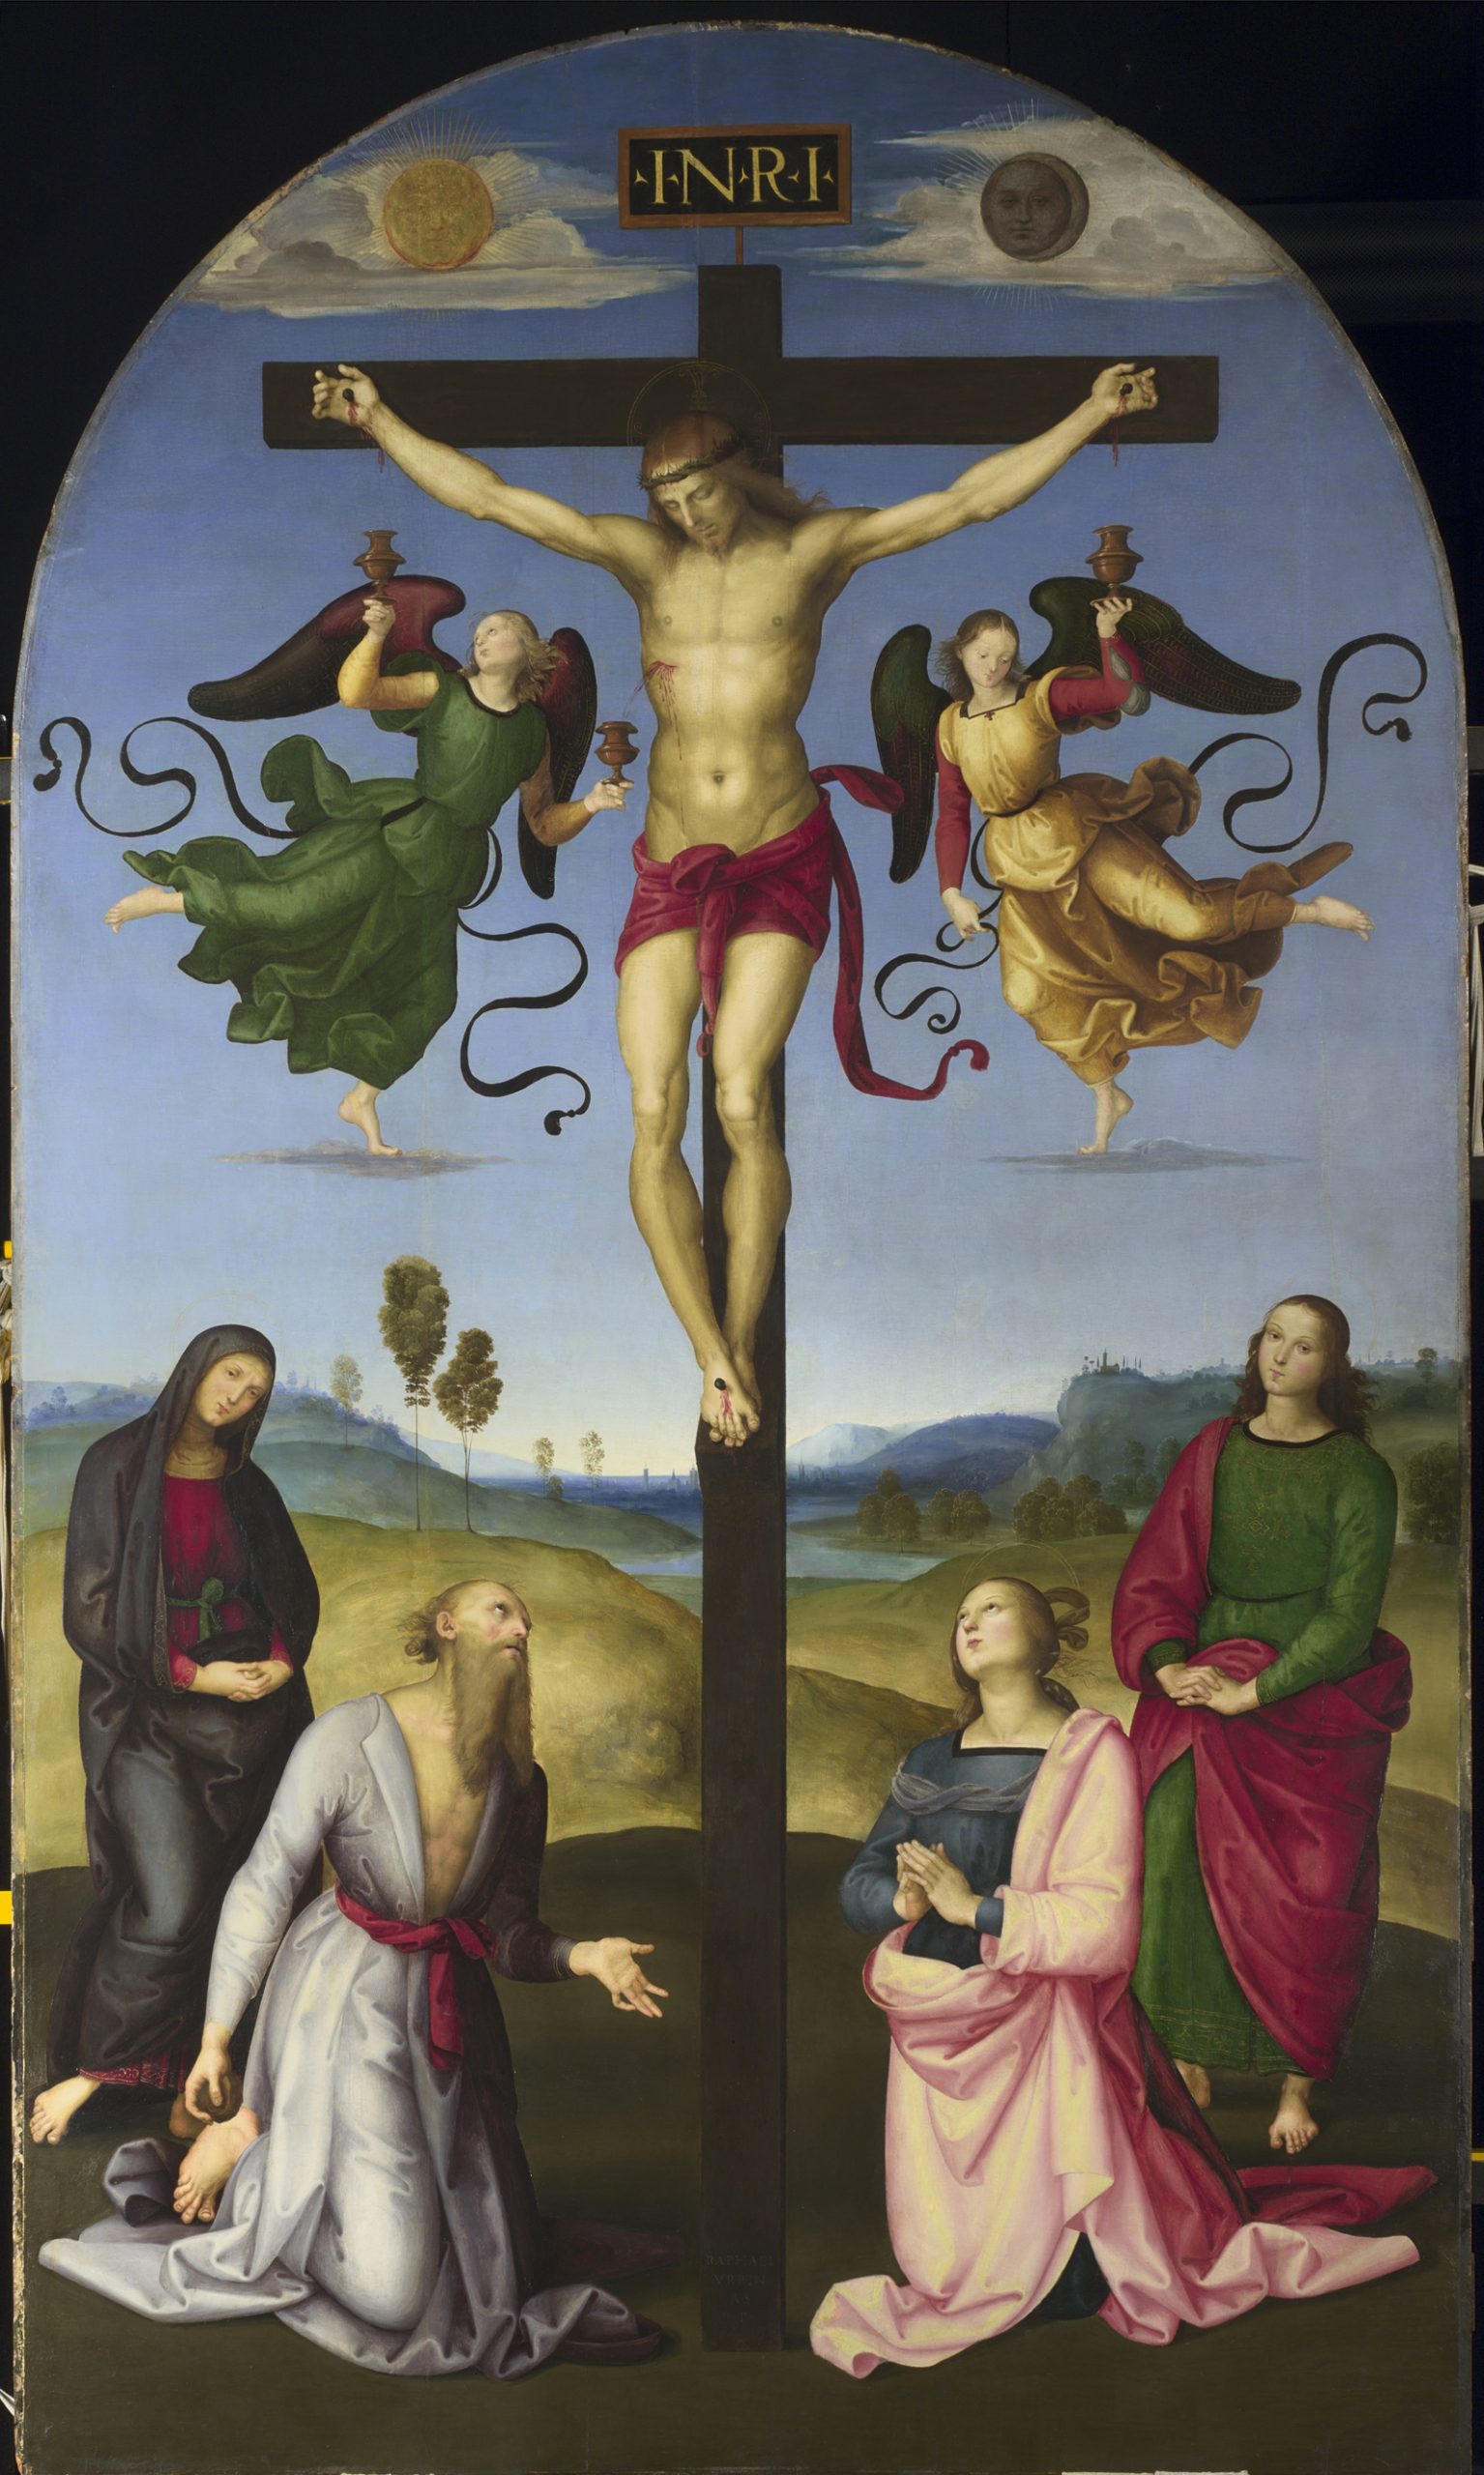 Raphael, The Crucified Christ with the Virgin Mary, Saints and Angels (The Mond Crucifixion), Short title: The Mond Crucifixion, about 1502-3, Oil on poplar, 283.3 x 167.3 cm, © The National Gallery, London